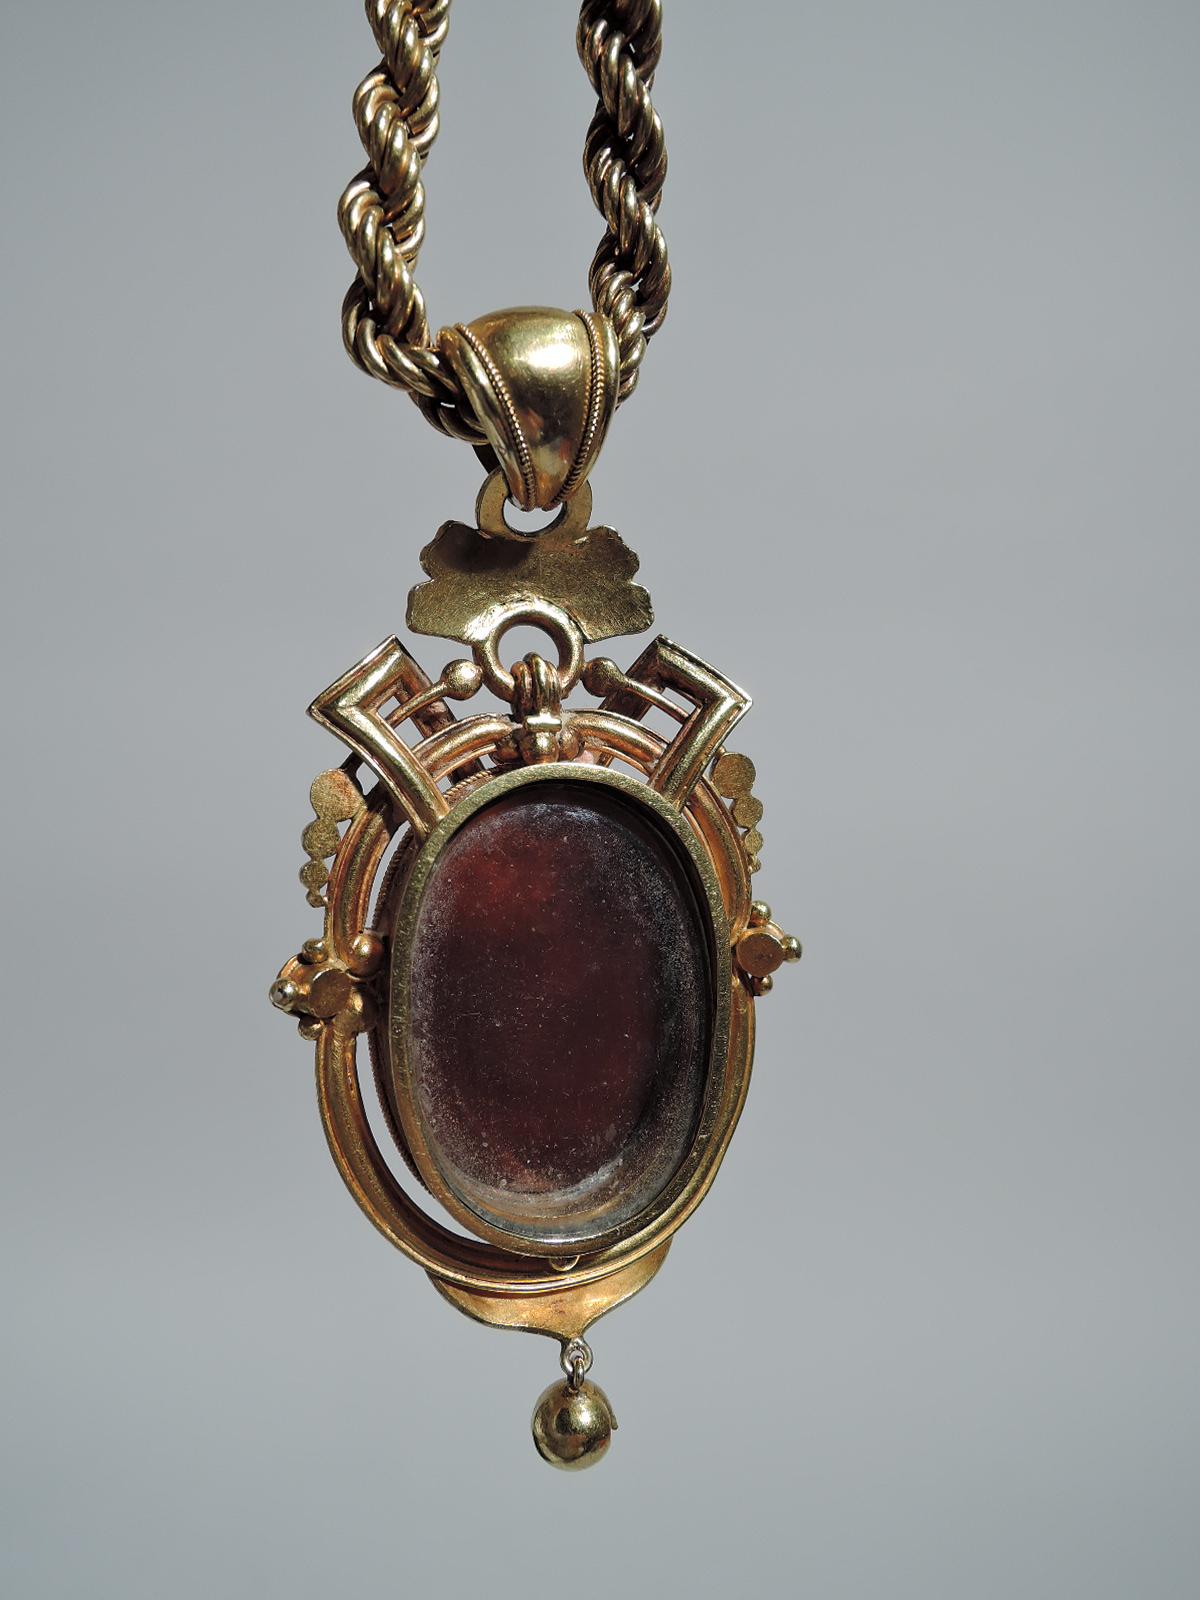 Antique Etruscan Revival 18 Karat Gold Locket and Chain with Agate Cameo 1